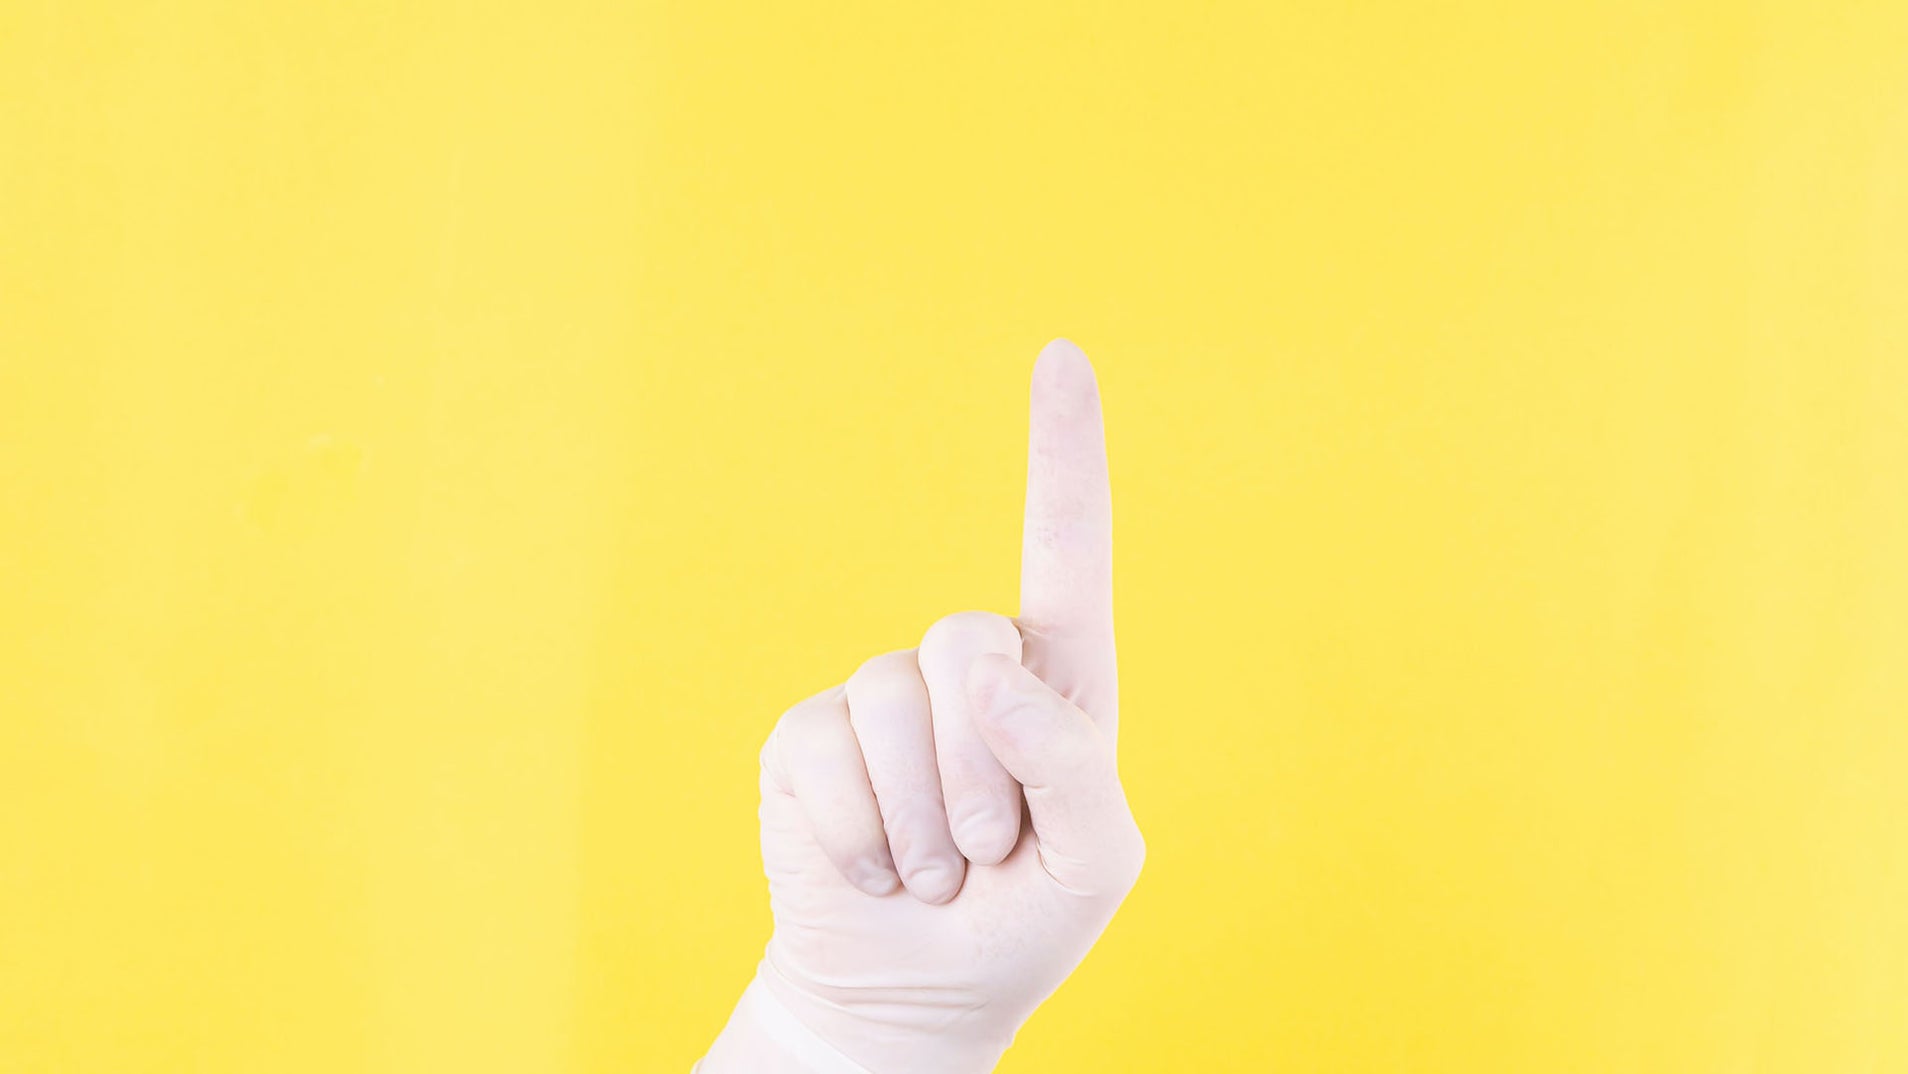 hand in white glove on yellow background with one finger raised